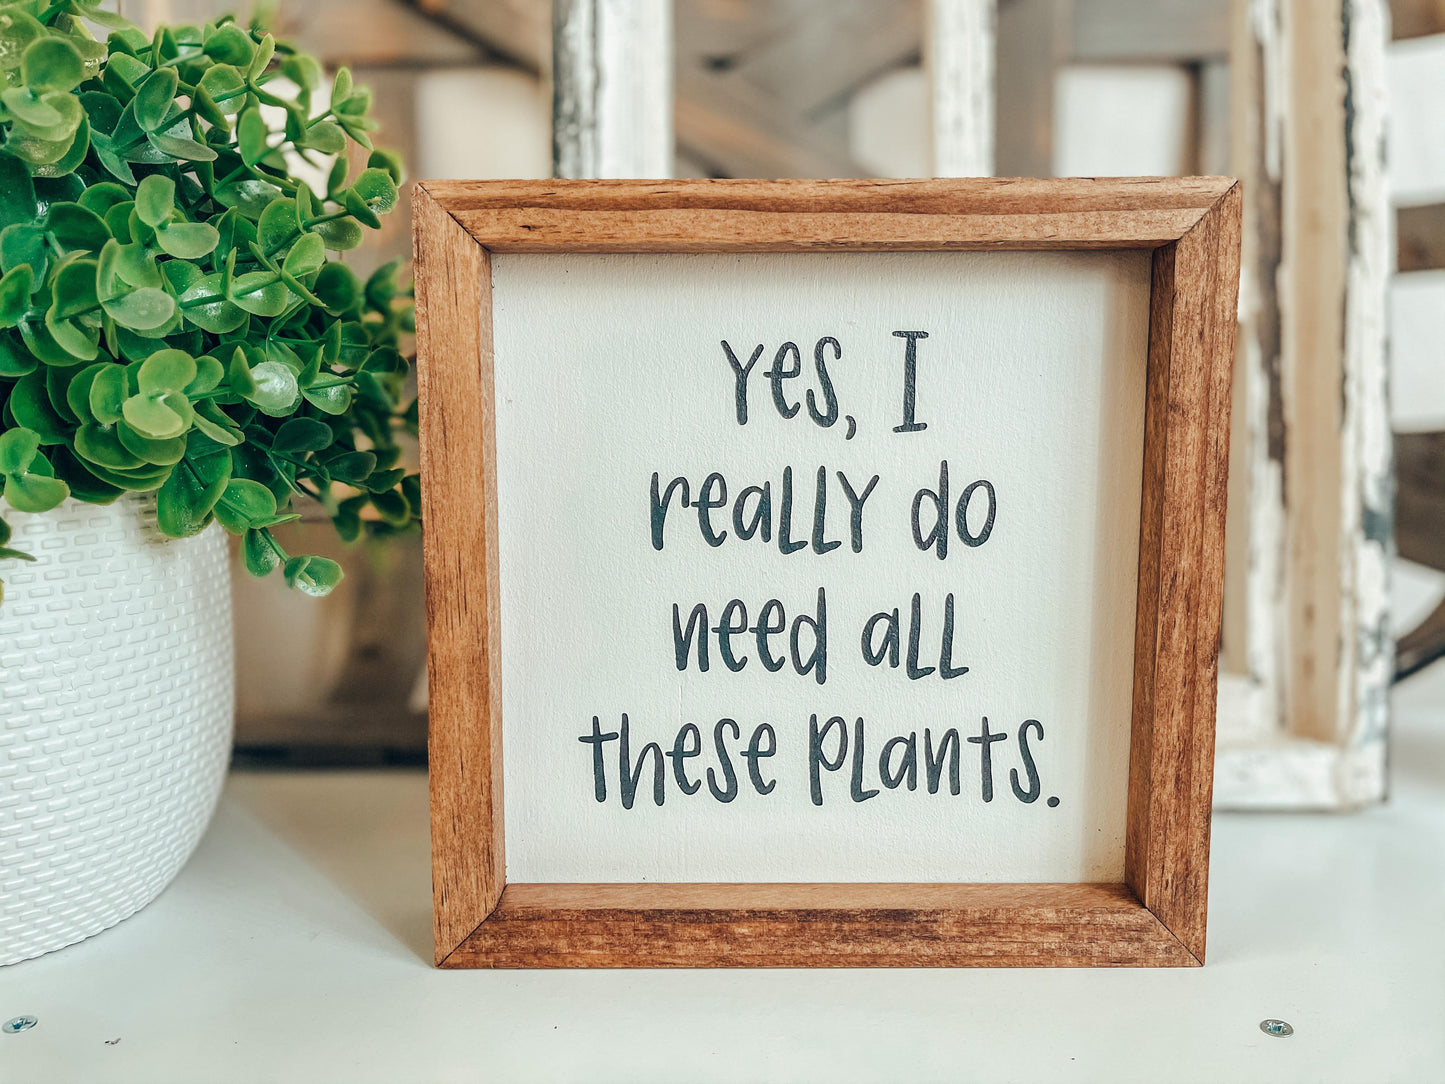 Yes, I do really need all these plants